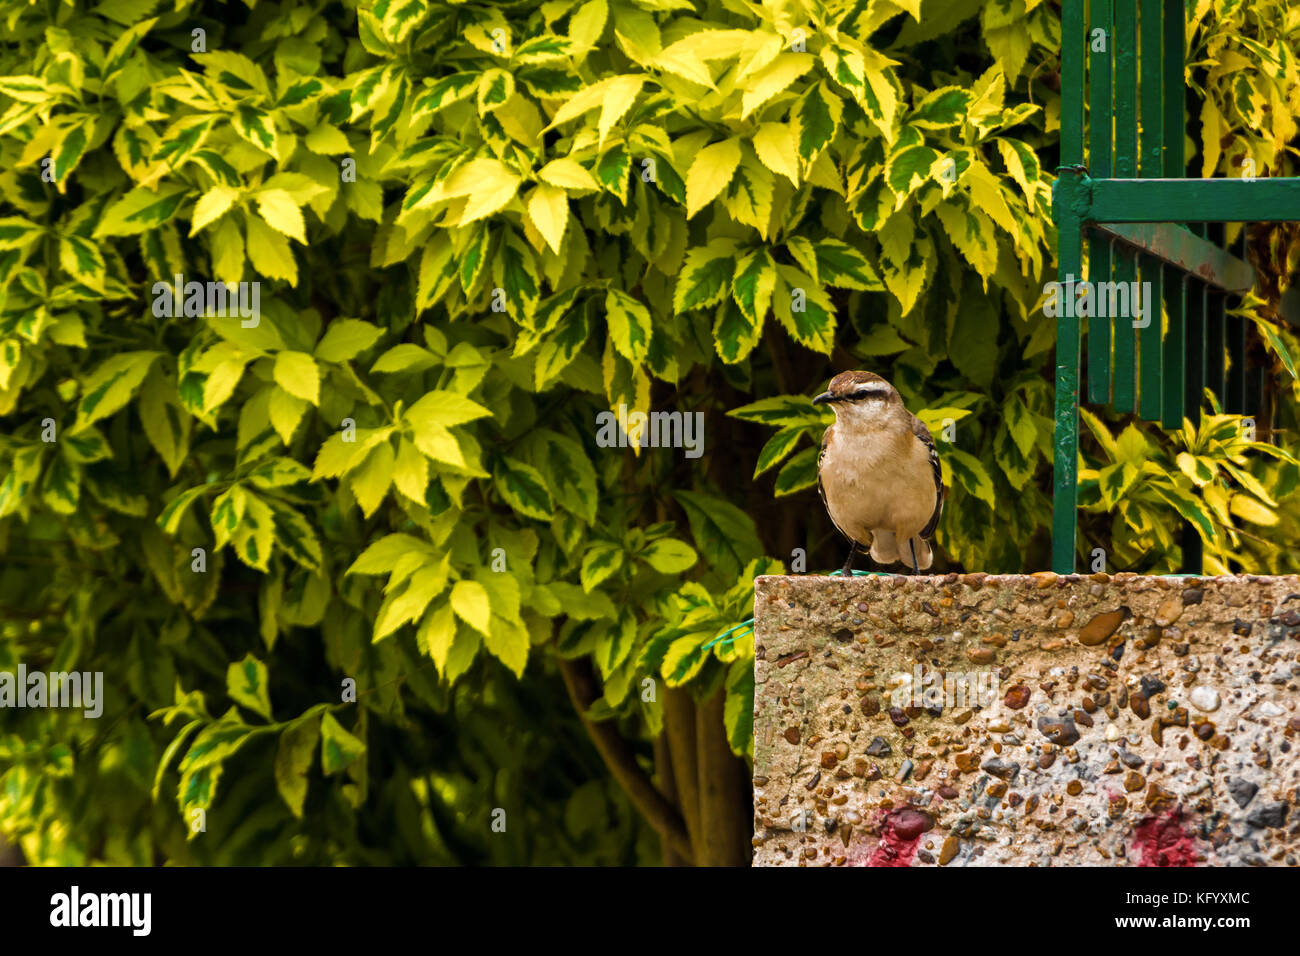 Little bird standing in the corner of a fence in La Plata Buenos Aires Stock Photo